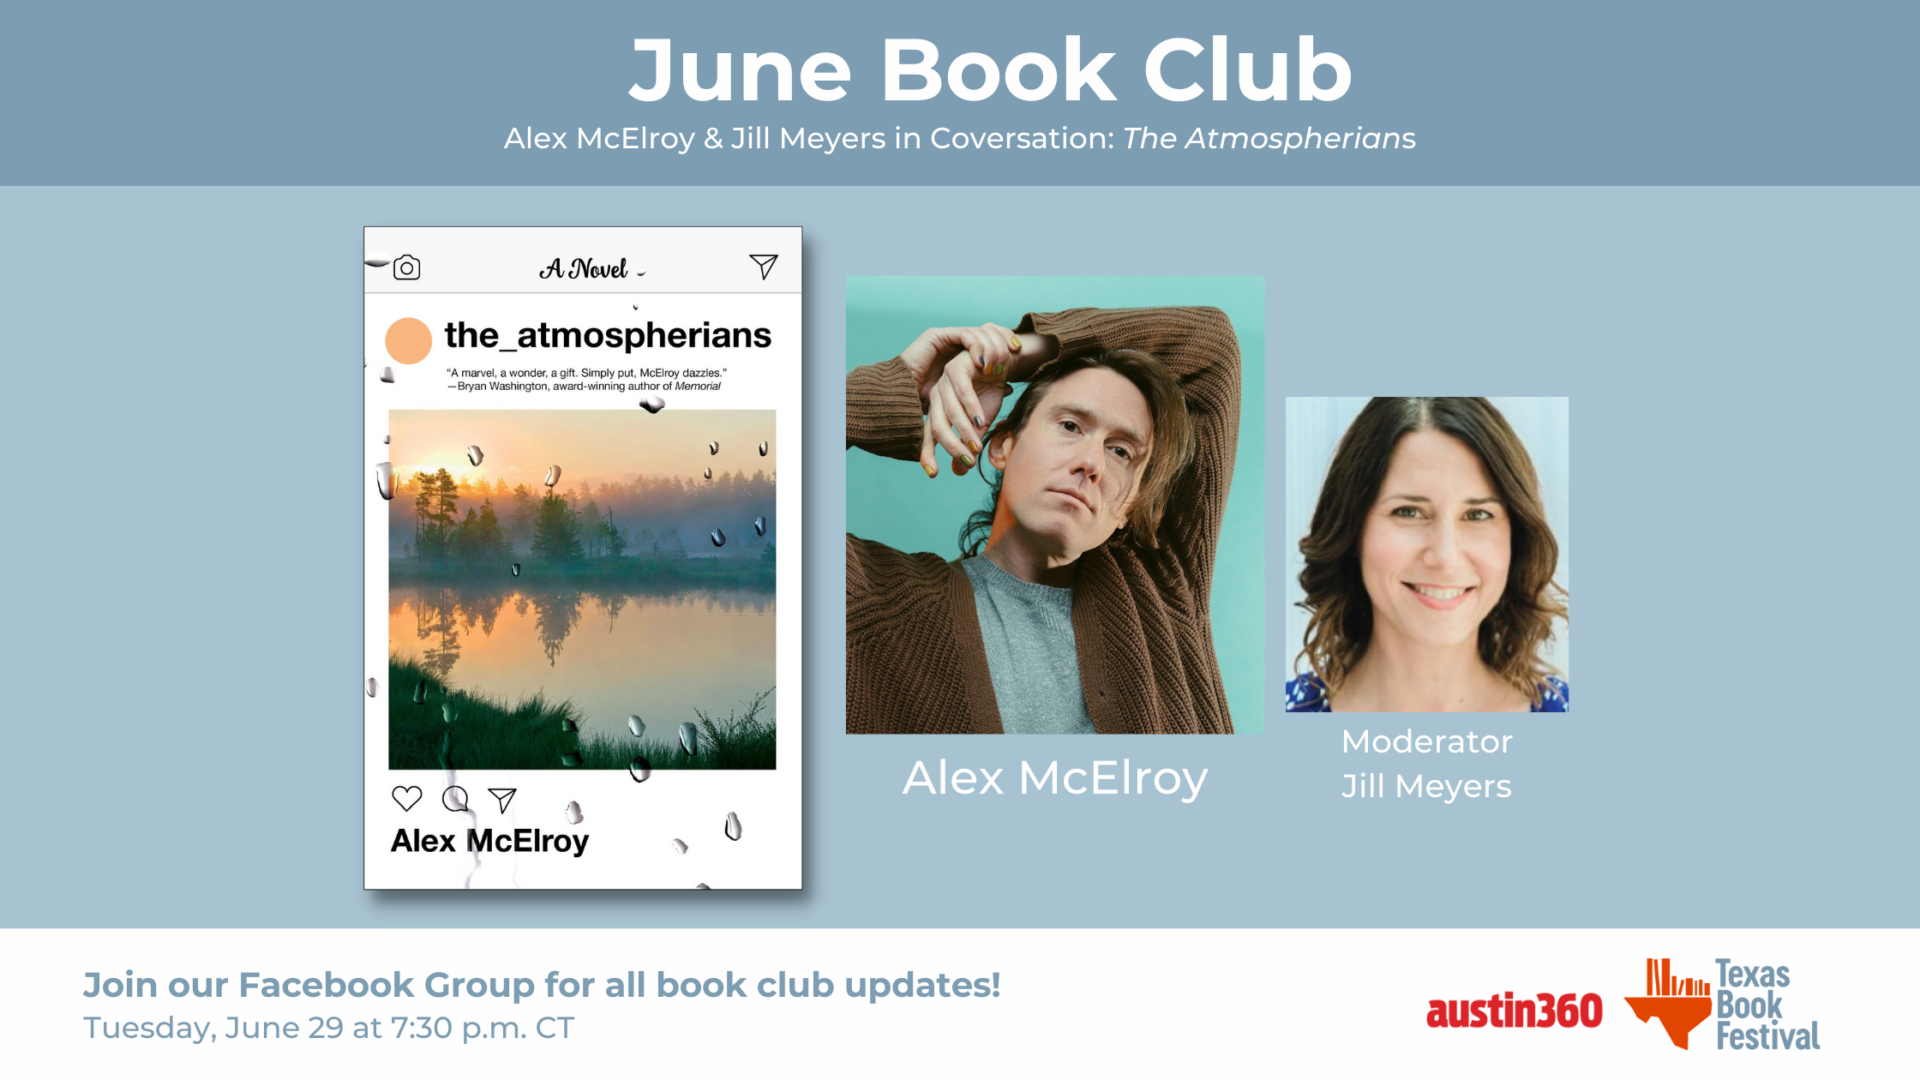 June Book Club: Alex McElroy in Conversation with Jill Meyers